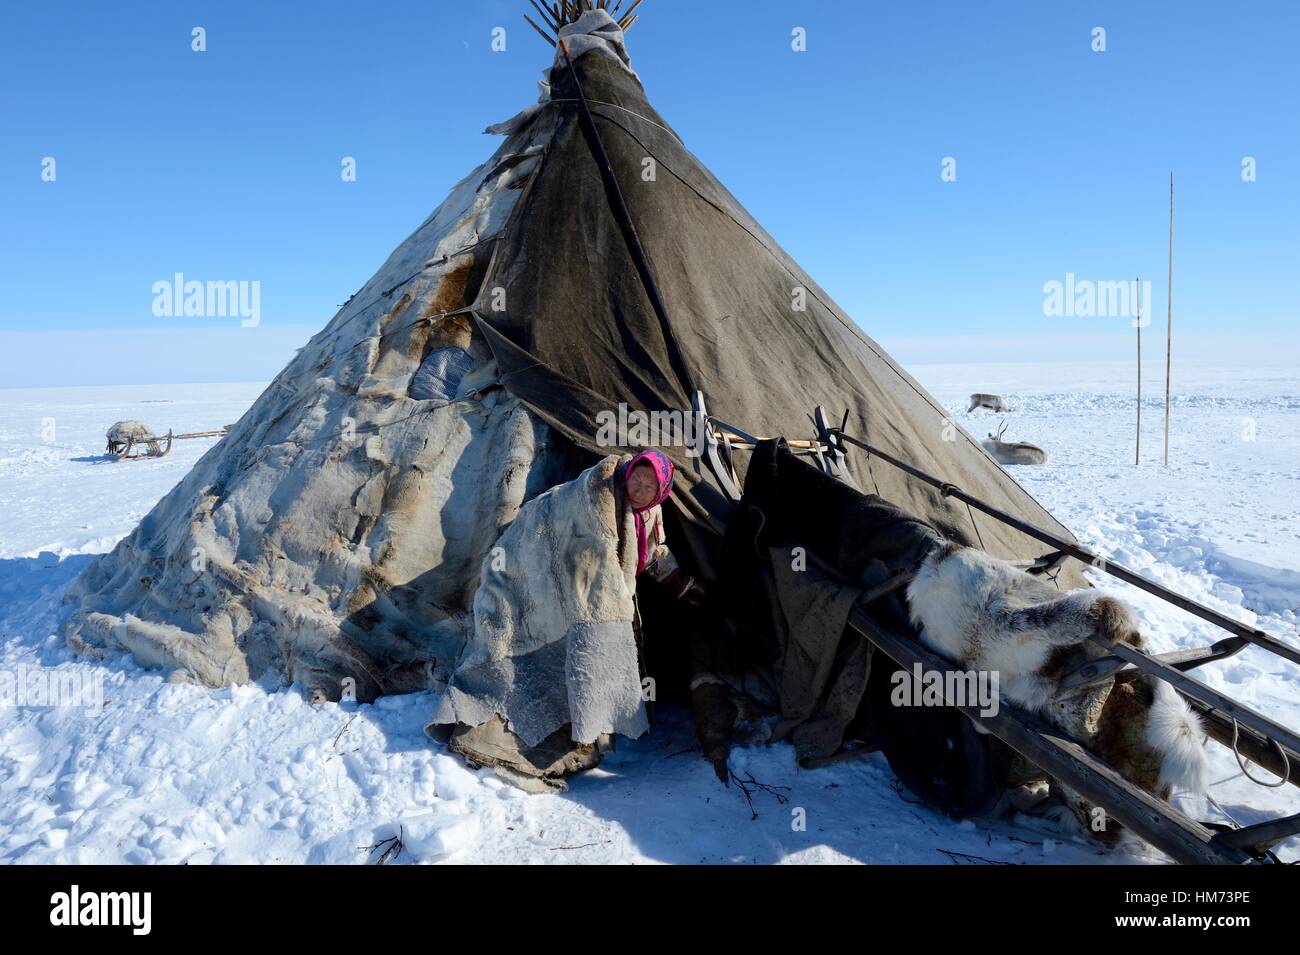 https://c8.alamy.com/comp/HM73PE/a-nenets-woman-at-the-entrance-of-her-reindeer-fur-covered-tent-chum-HM73PE.jpg